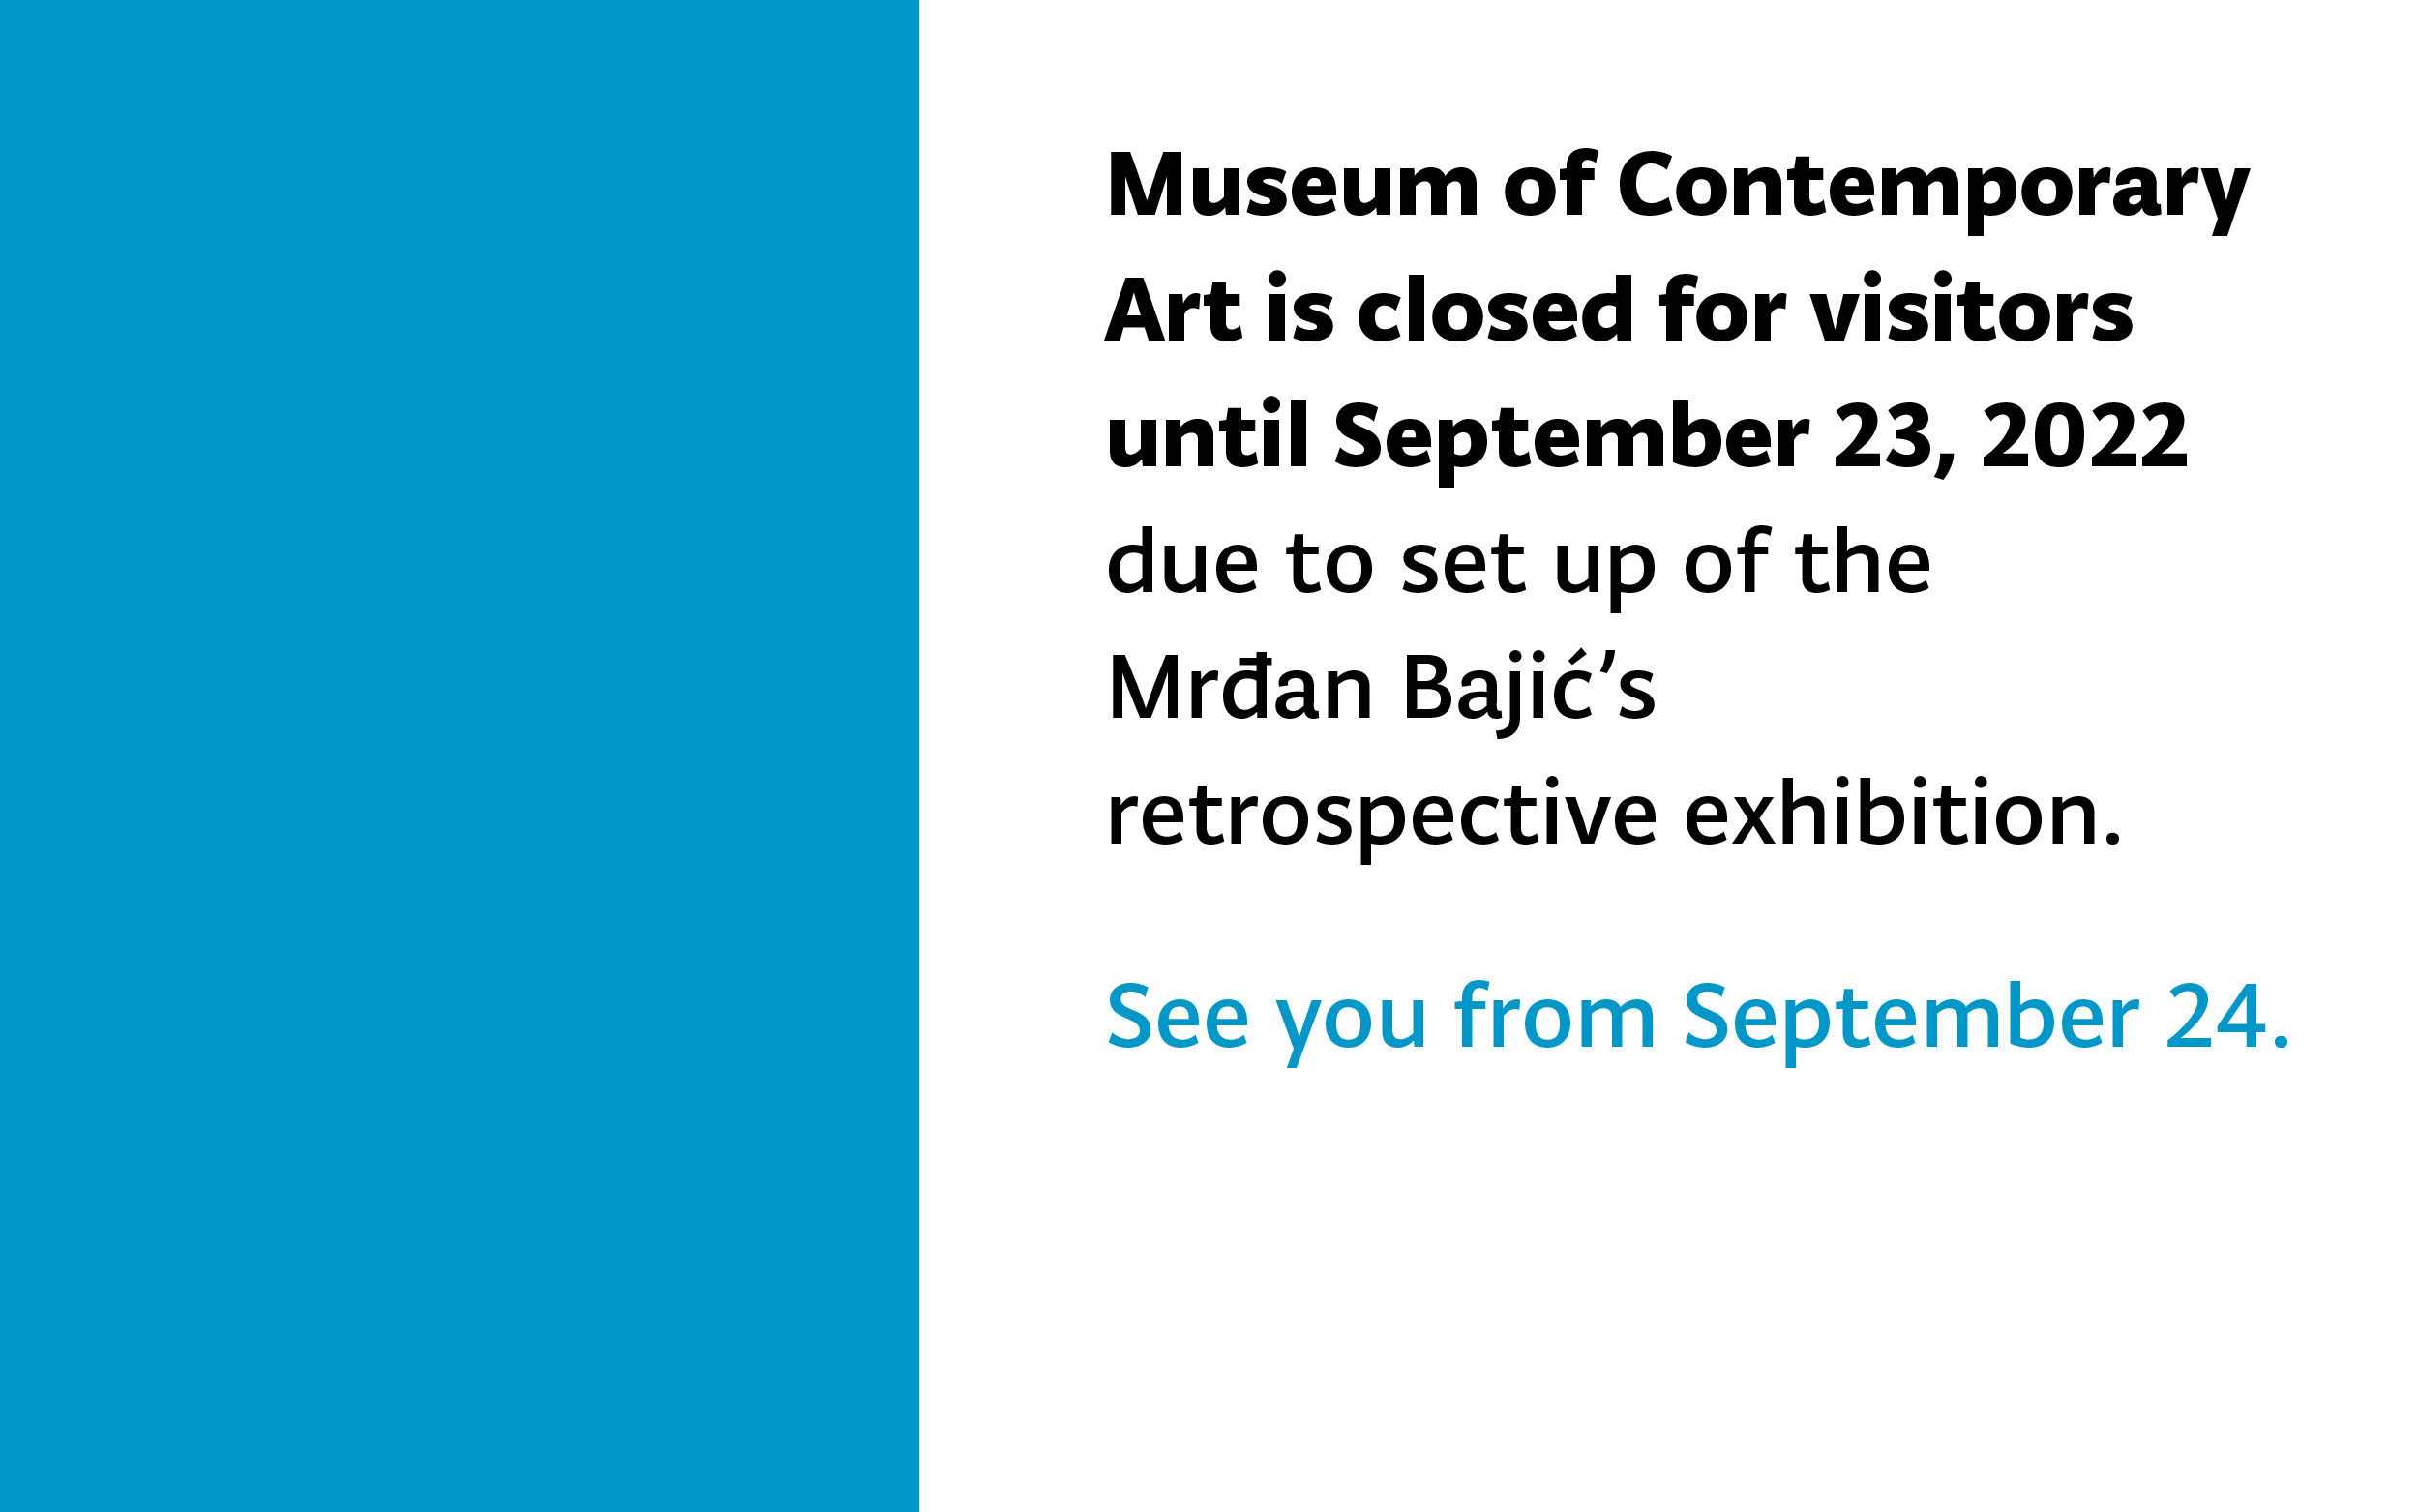 The Museum is temporarily closed for visitors